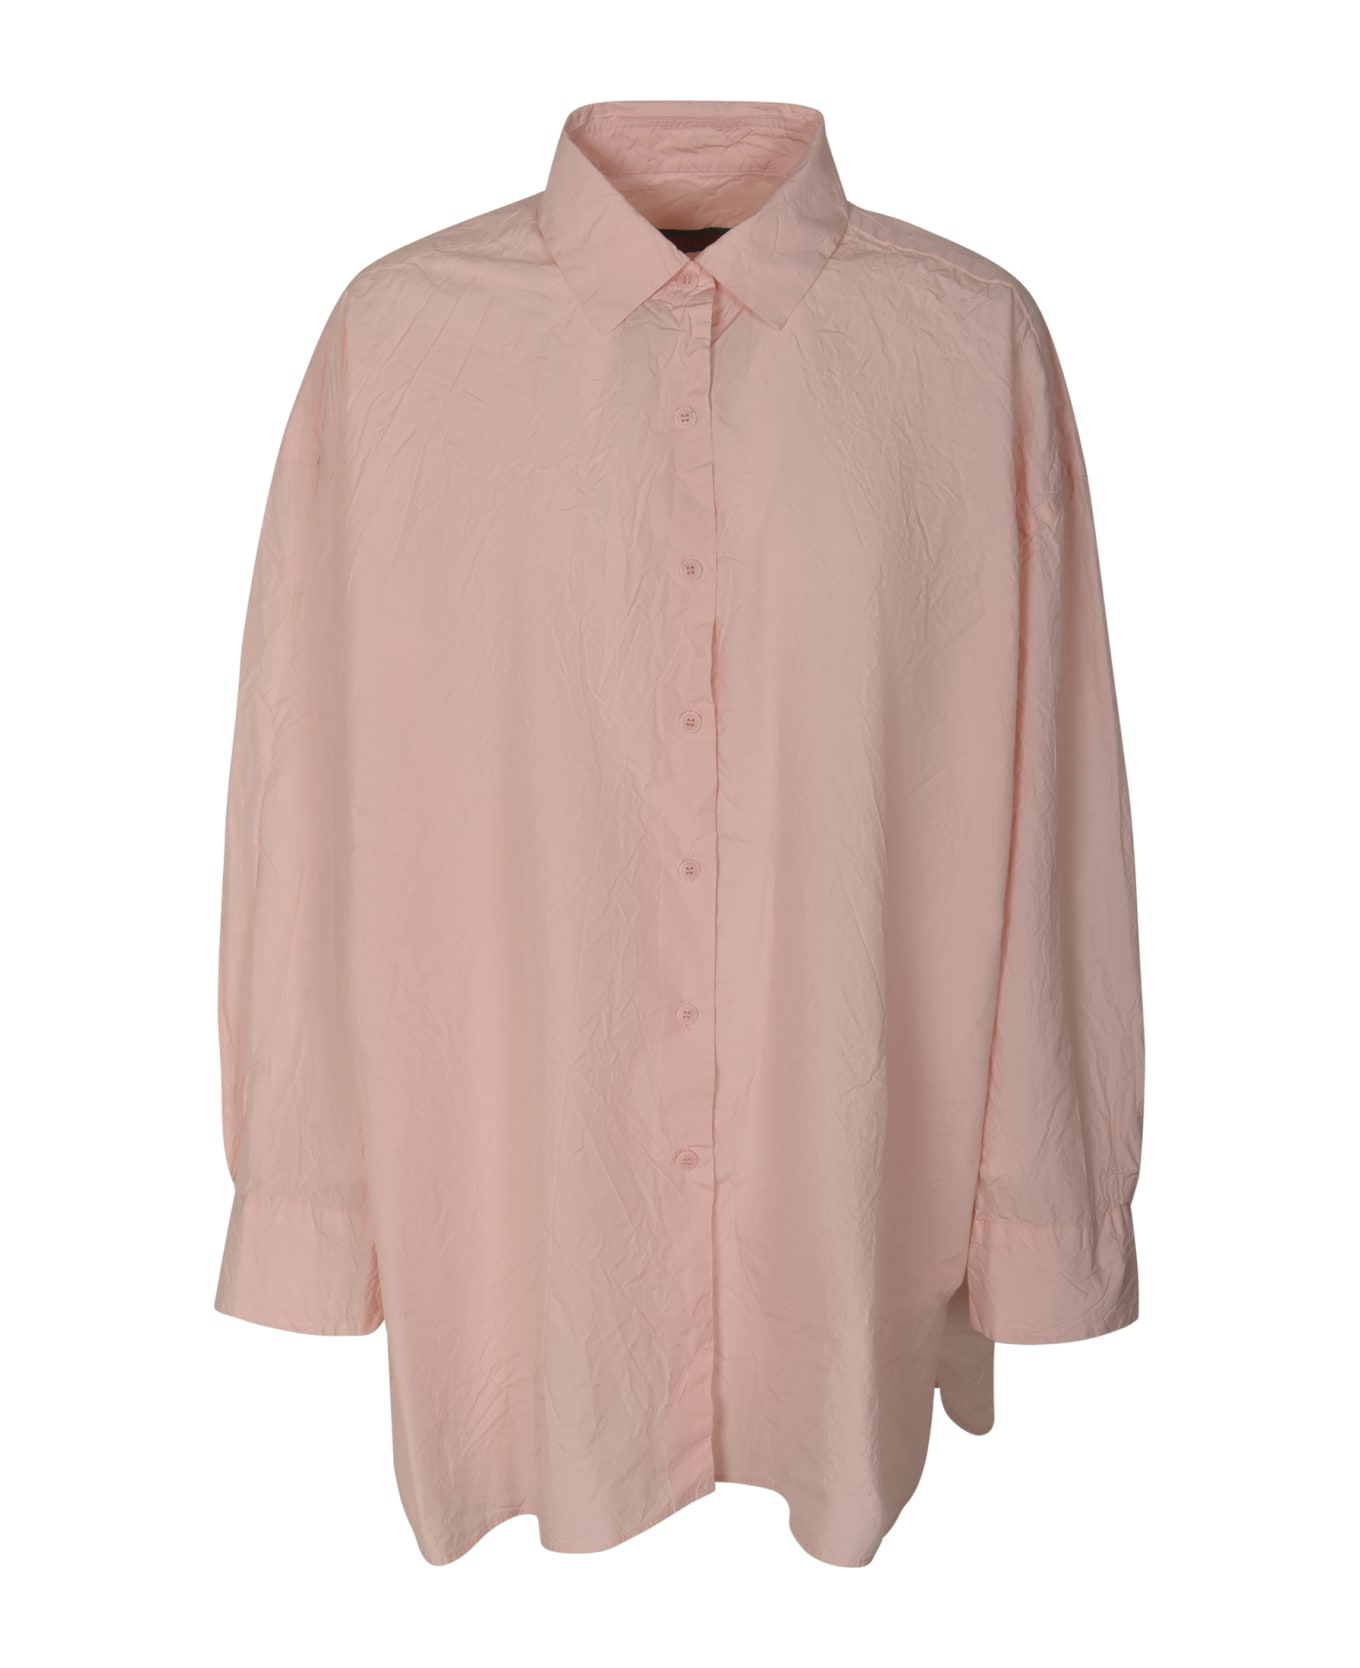 Casey Casey Classic Buttoned Shirt - Pink シャツ